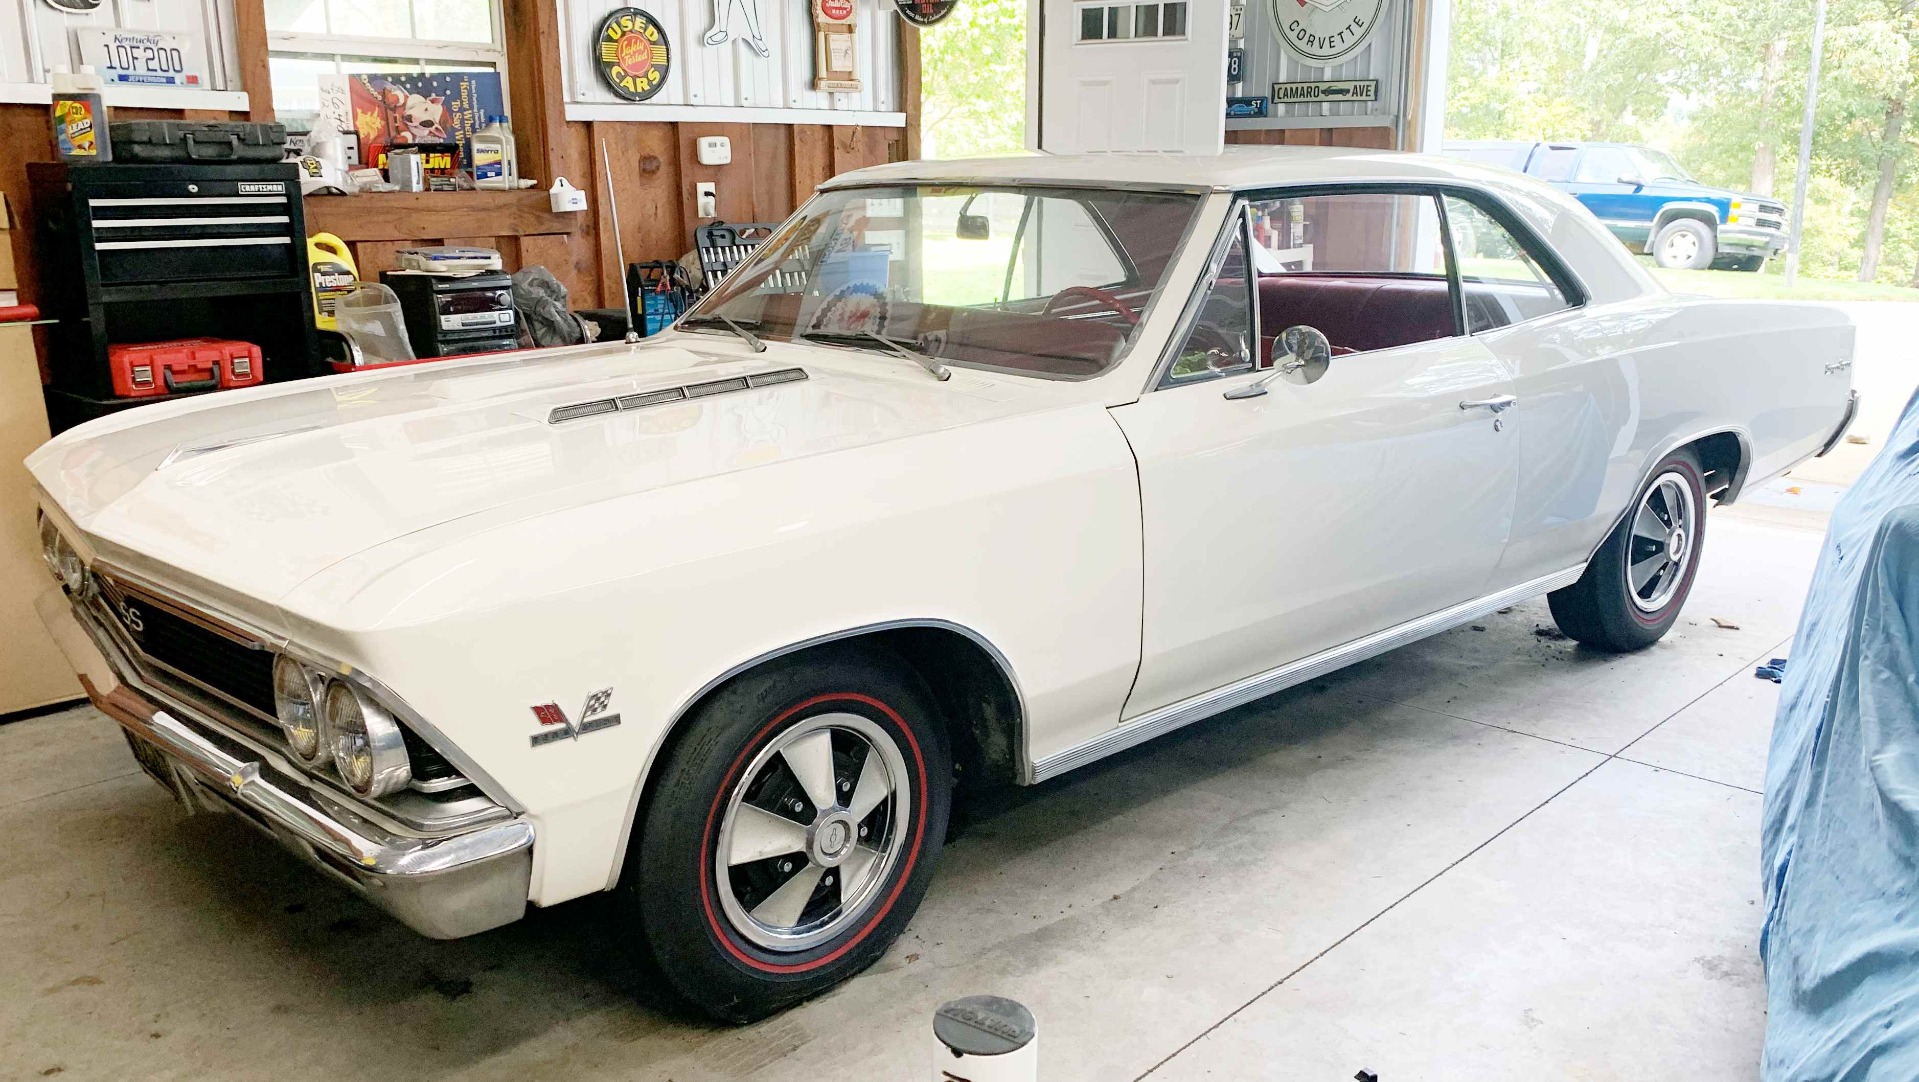 Used 1966 Chevrolet Super Sport  185 , For Sale $62000, Call Us: (704) 996-3735